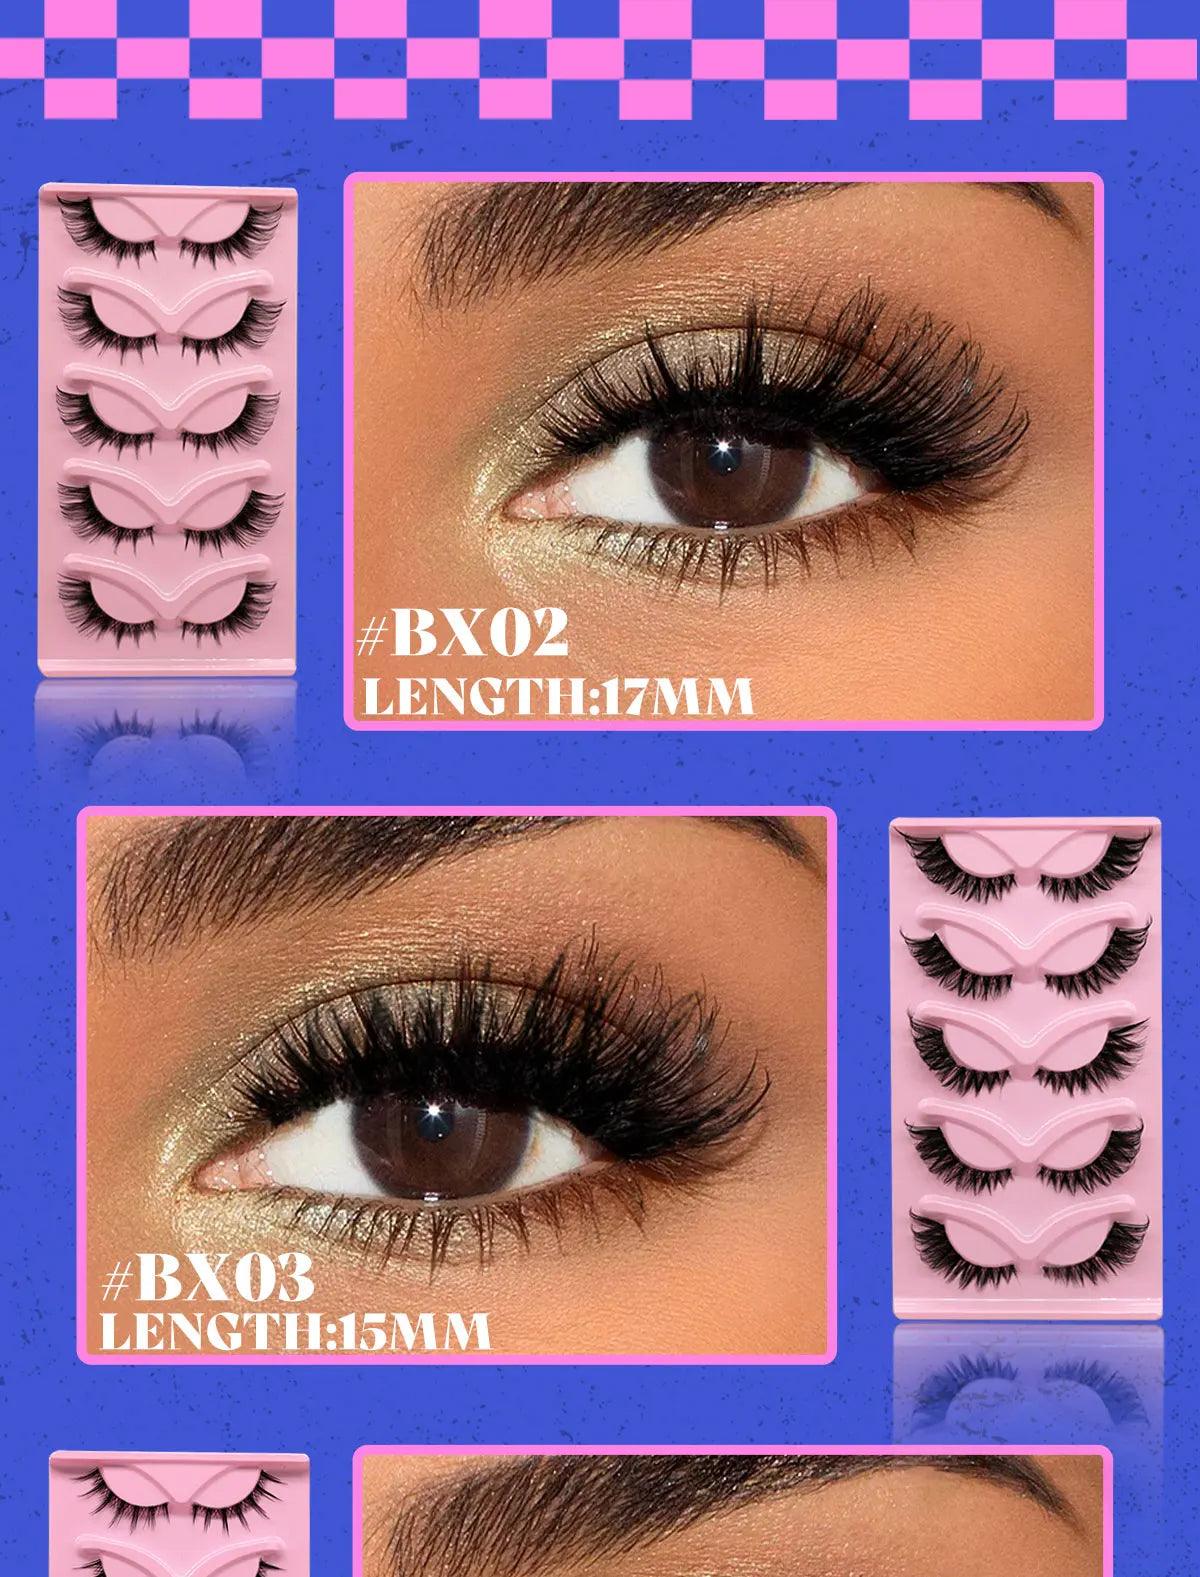 Cat Eye Faux Mink Lashes: Natural & Wispy